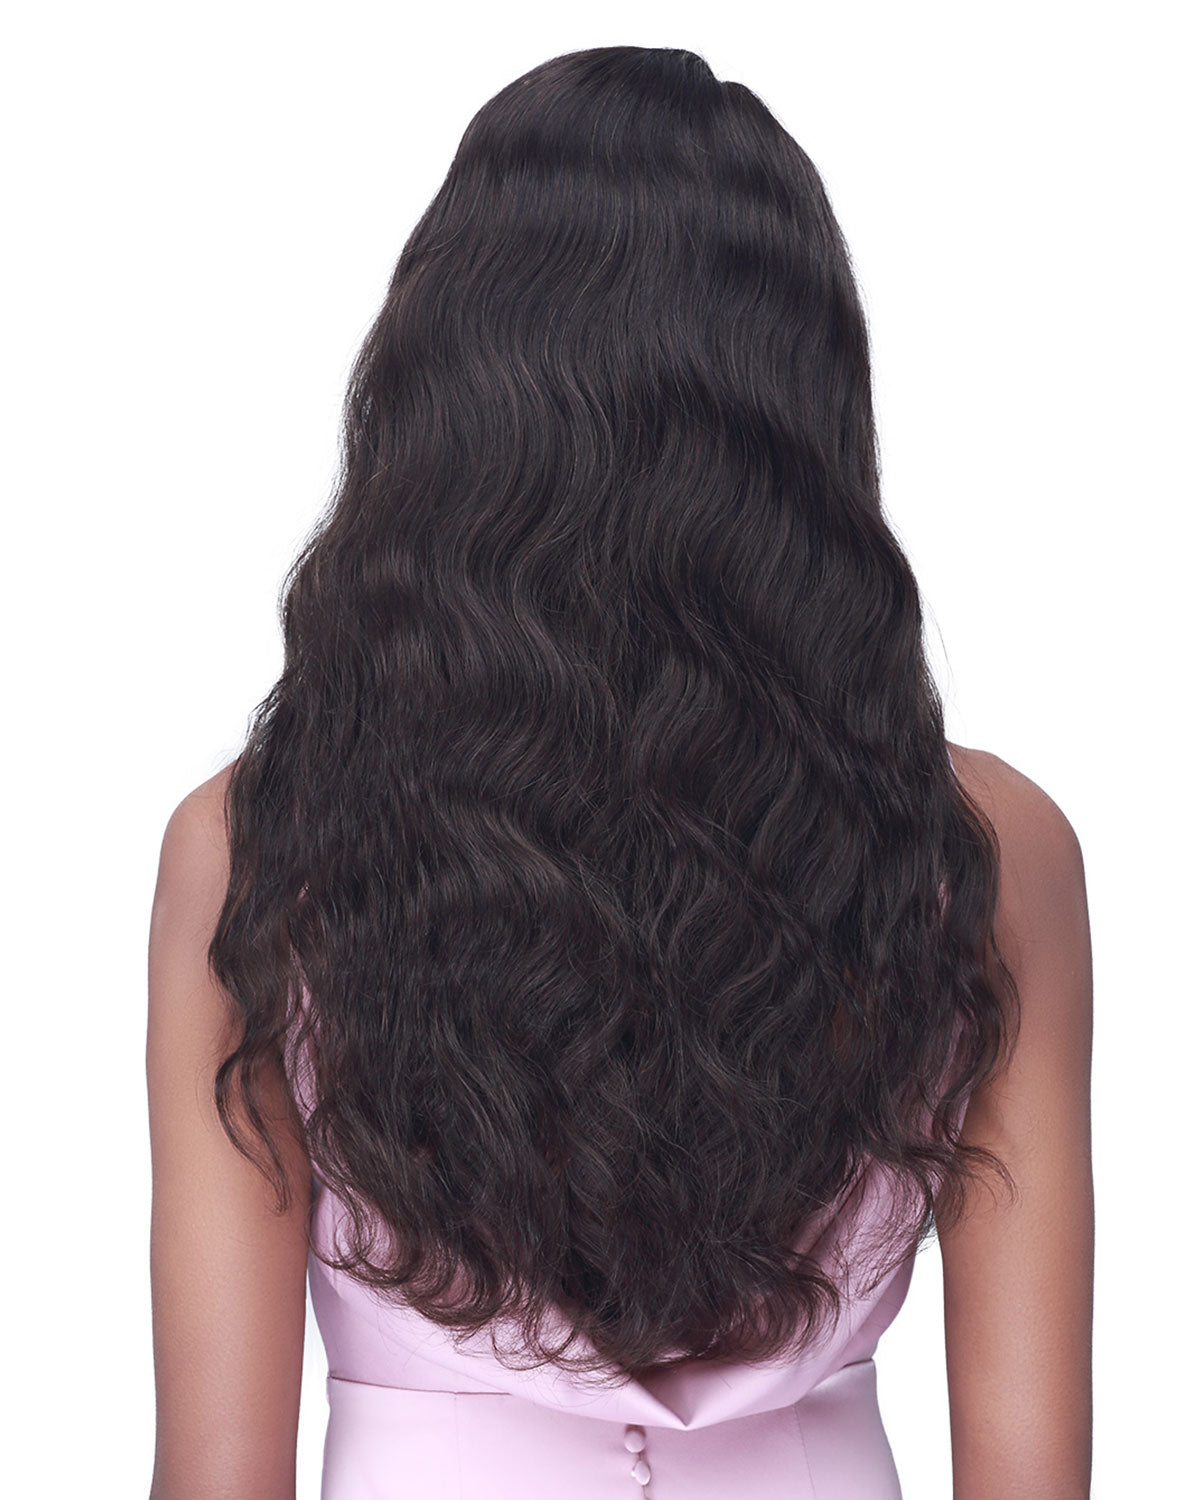 Body Wave 22 | Lace Front Human Hair Wig by Bobbi Boss